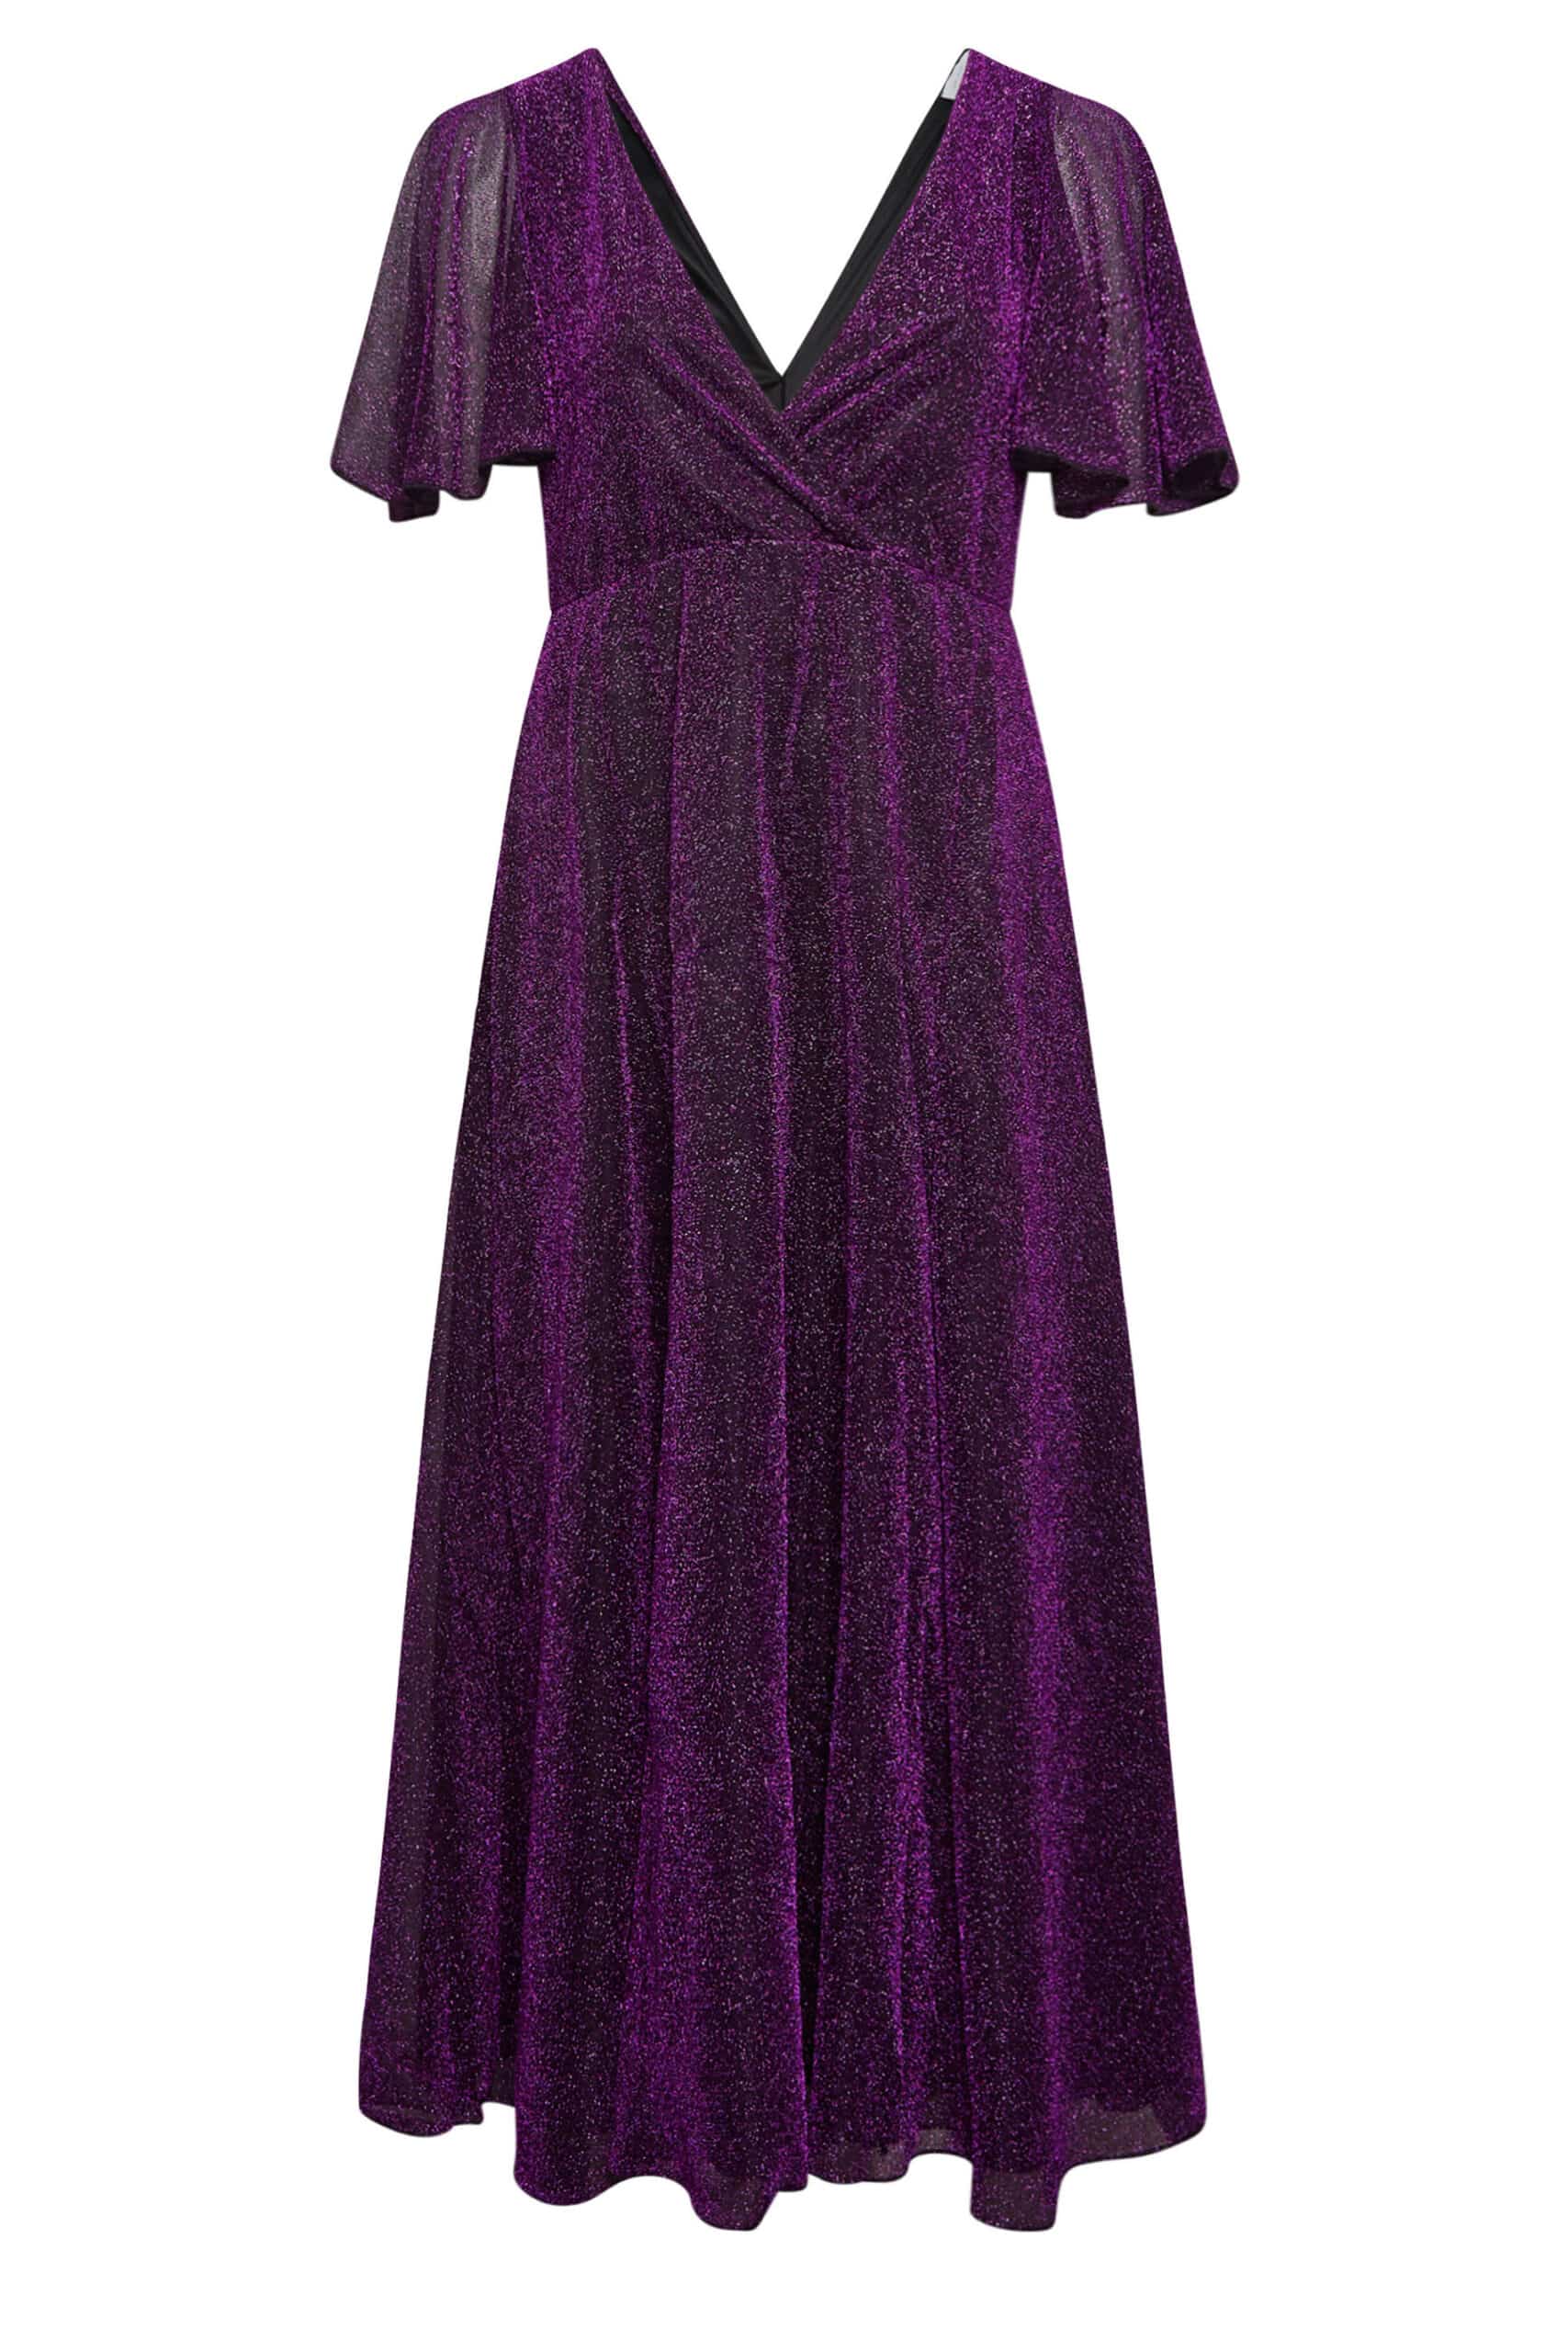 YOURS LONDON Curve Purple Glitter Angel Sleeve Maxi Dress Discounts and Cashback